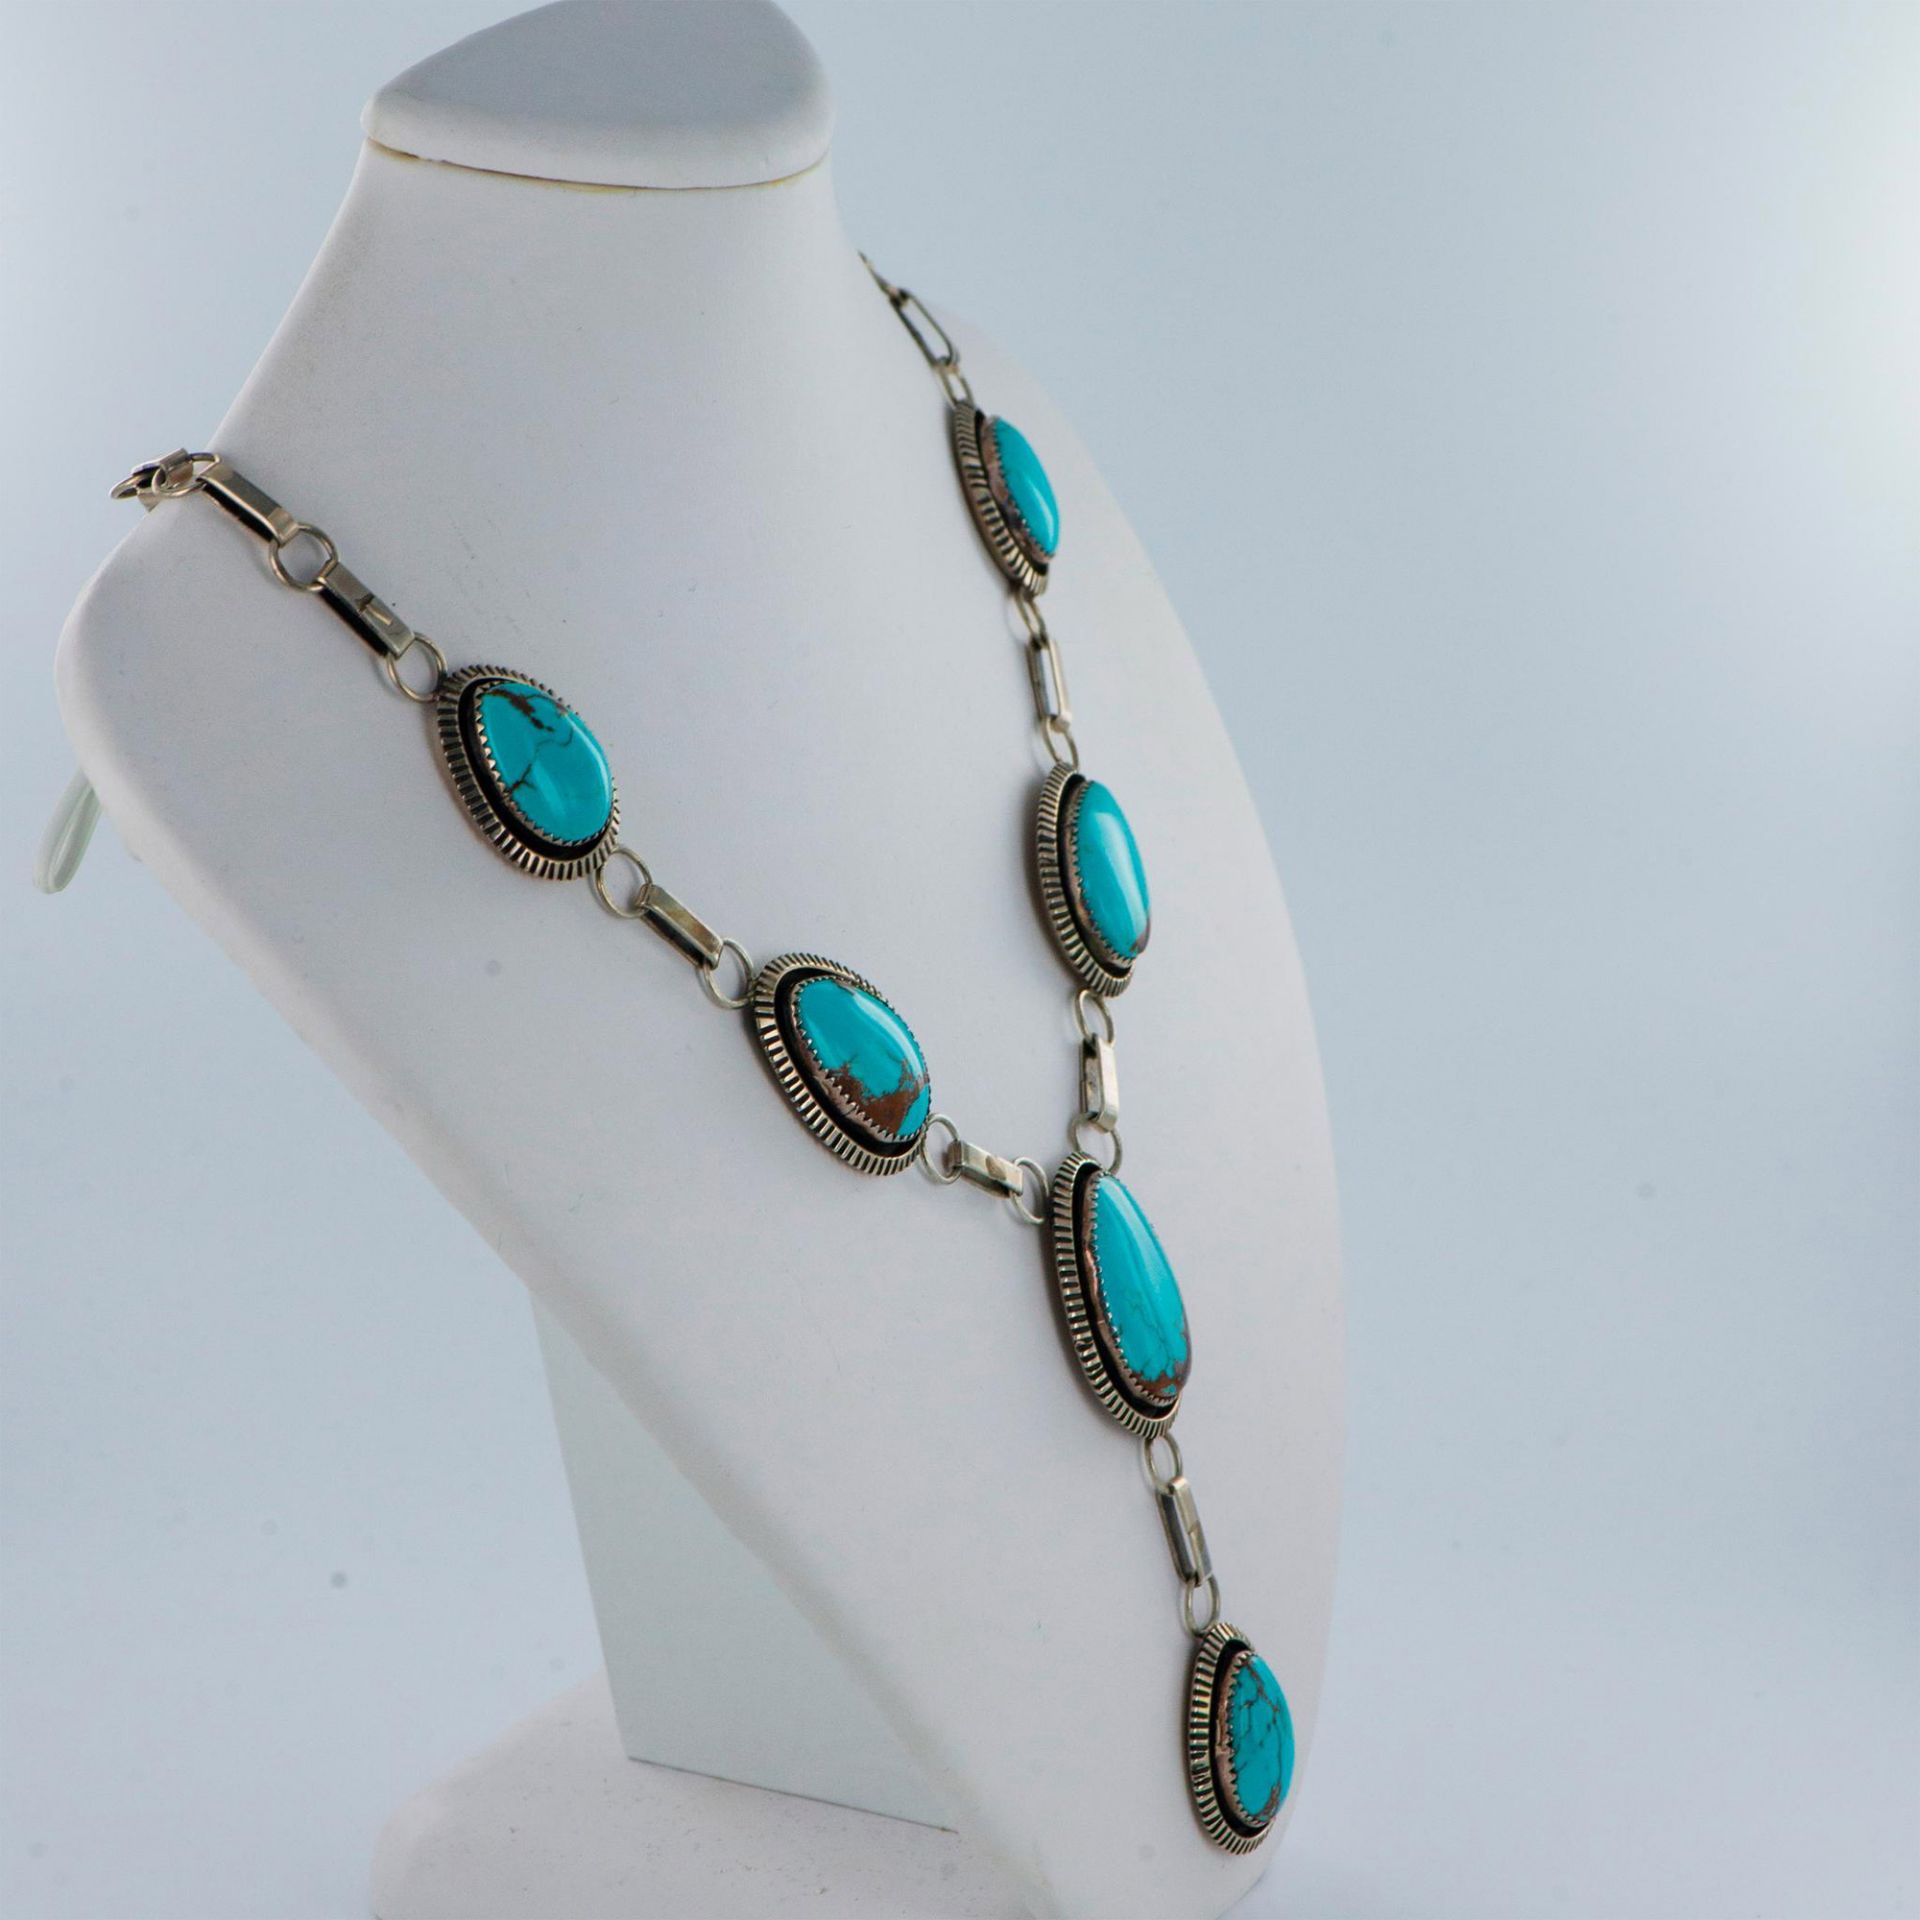 M. Begay Navajo Sterling Silver and Turquoise Drop Necklace - Image 3 of 4